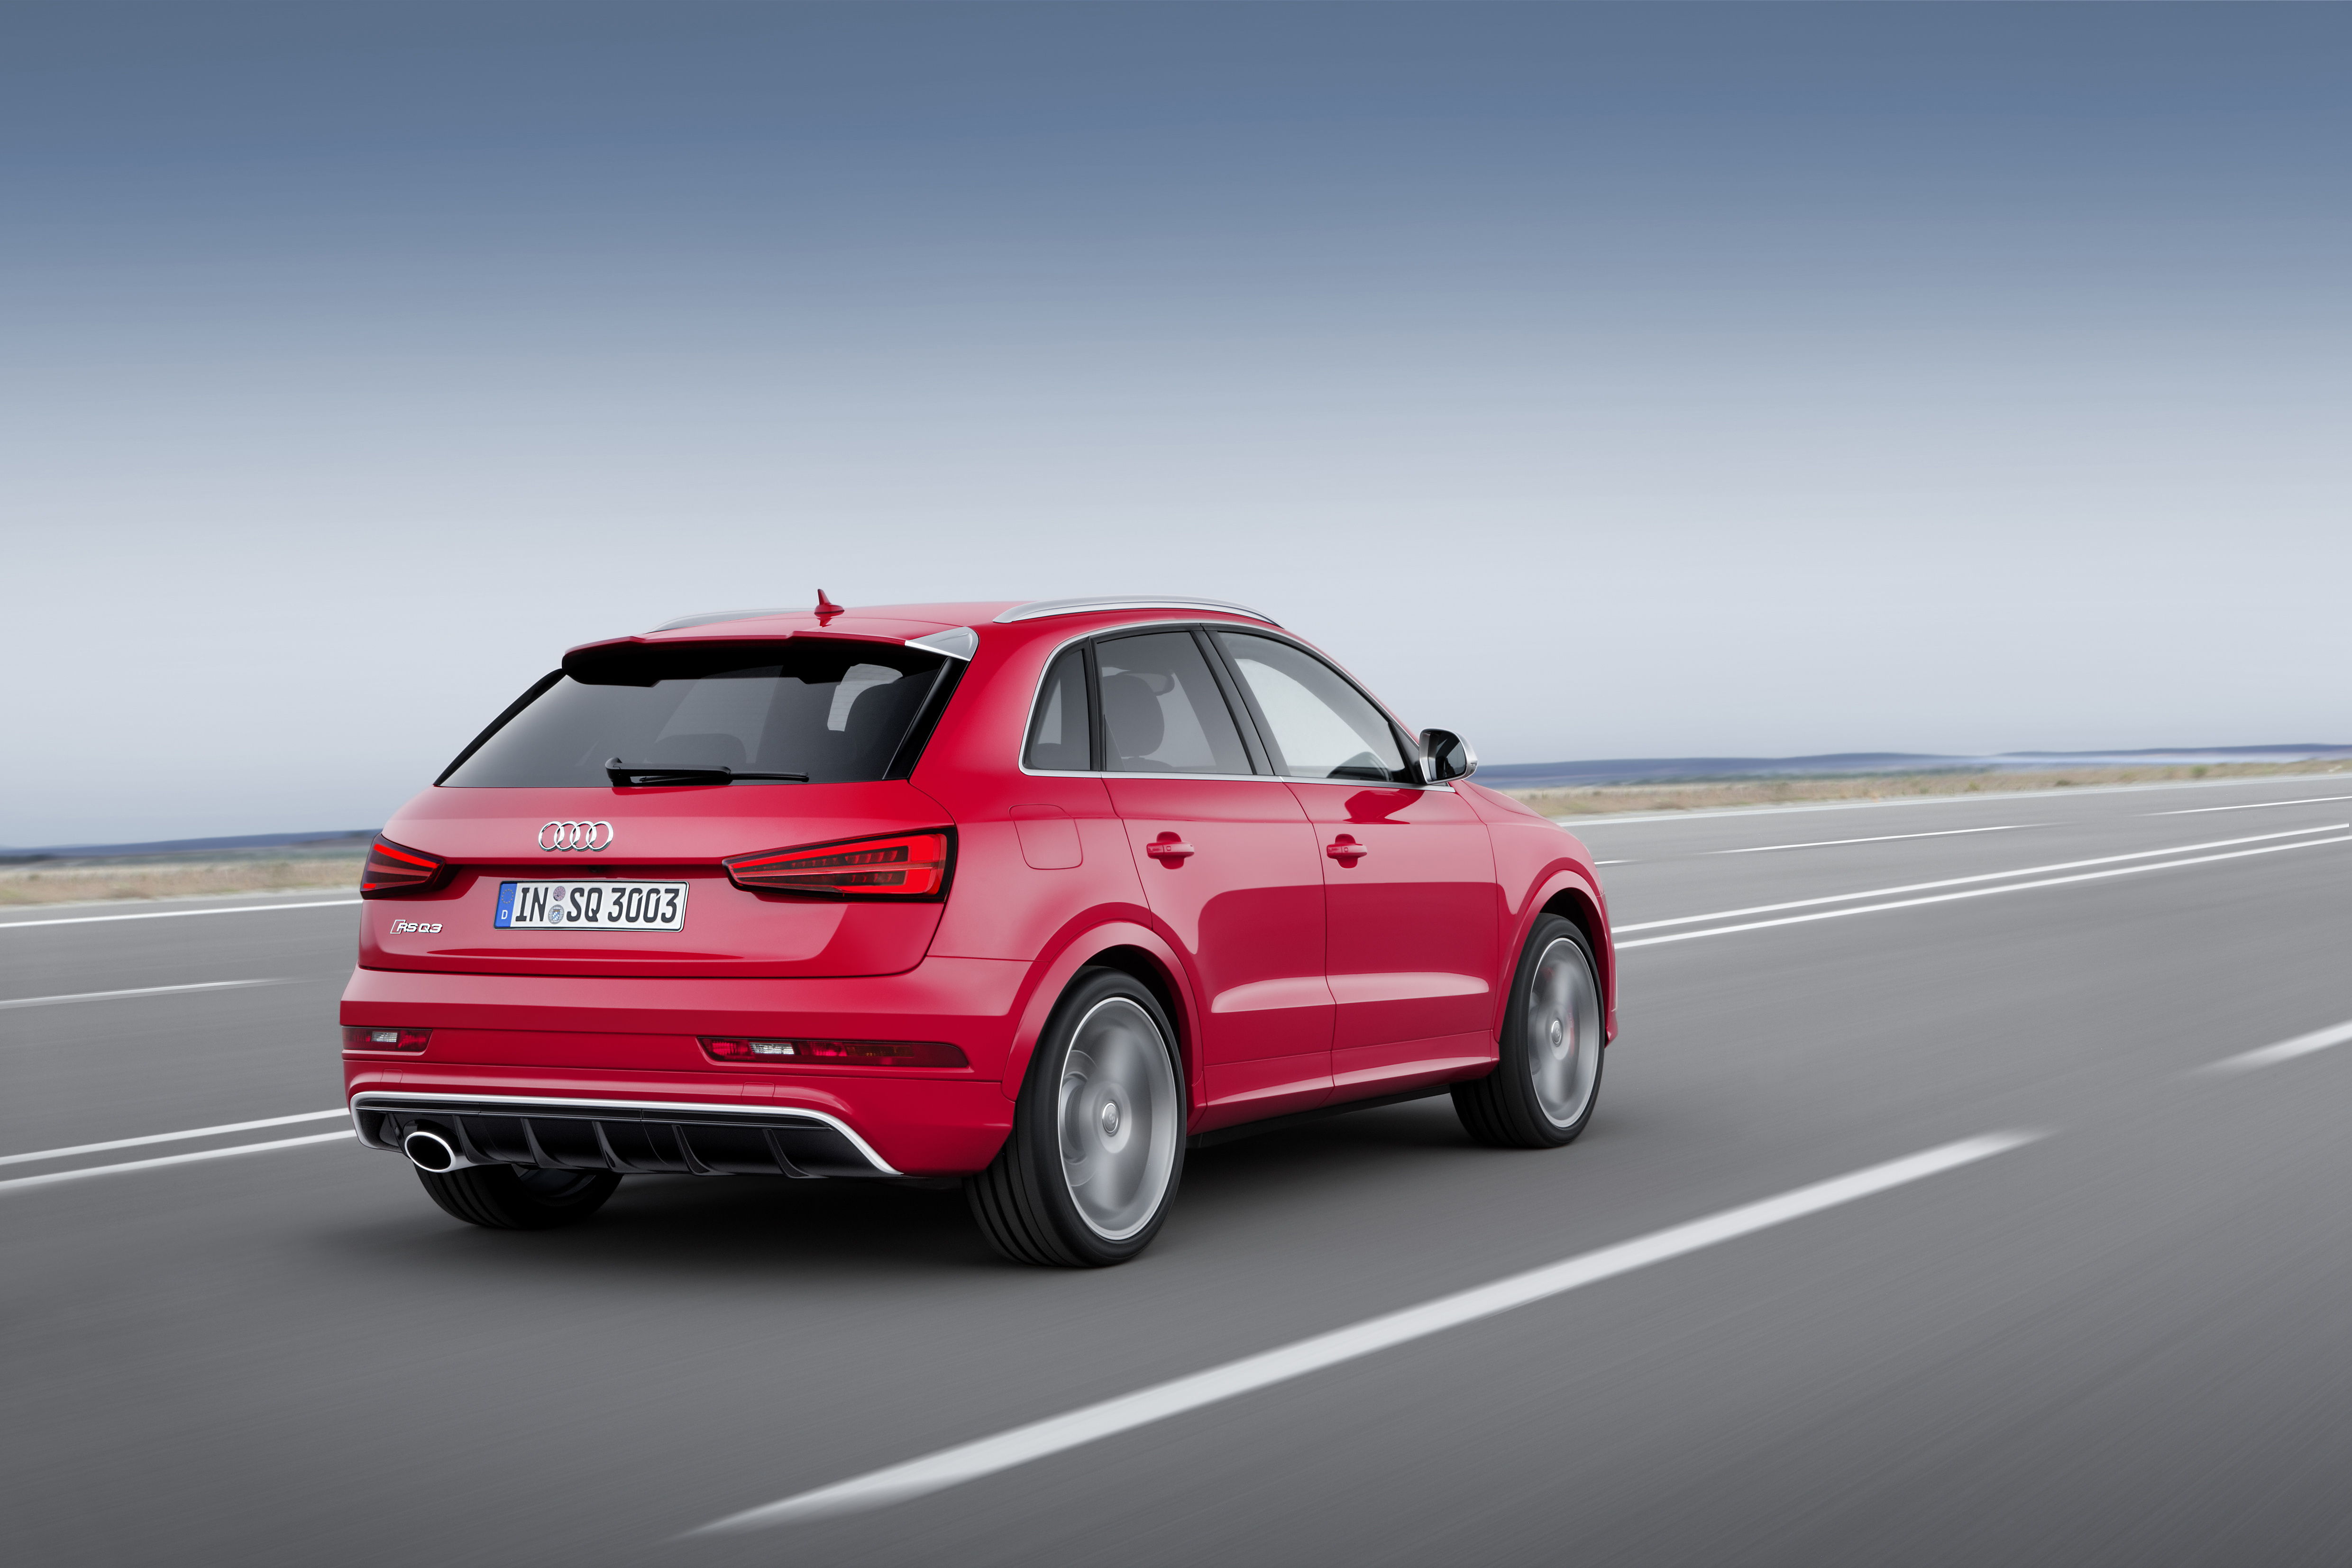 V d q 2 3. Audi q4 2015. Ауди q3 РС 2015. "Audi" "RS q3" "2015" d. Audi RS q3.